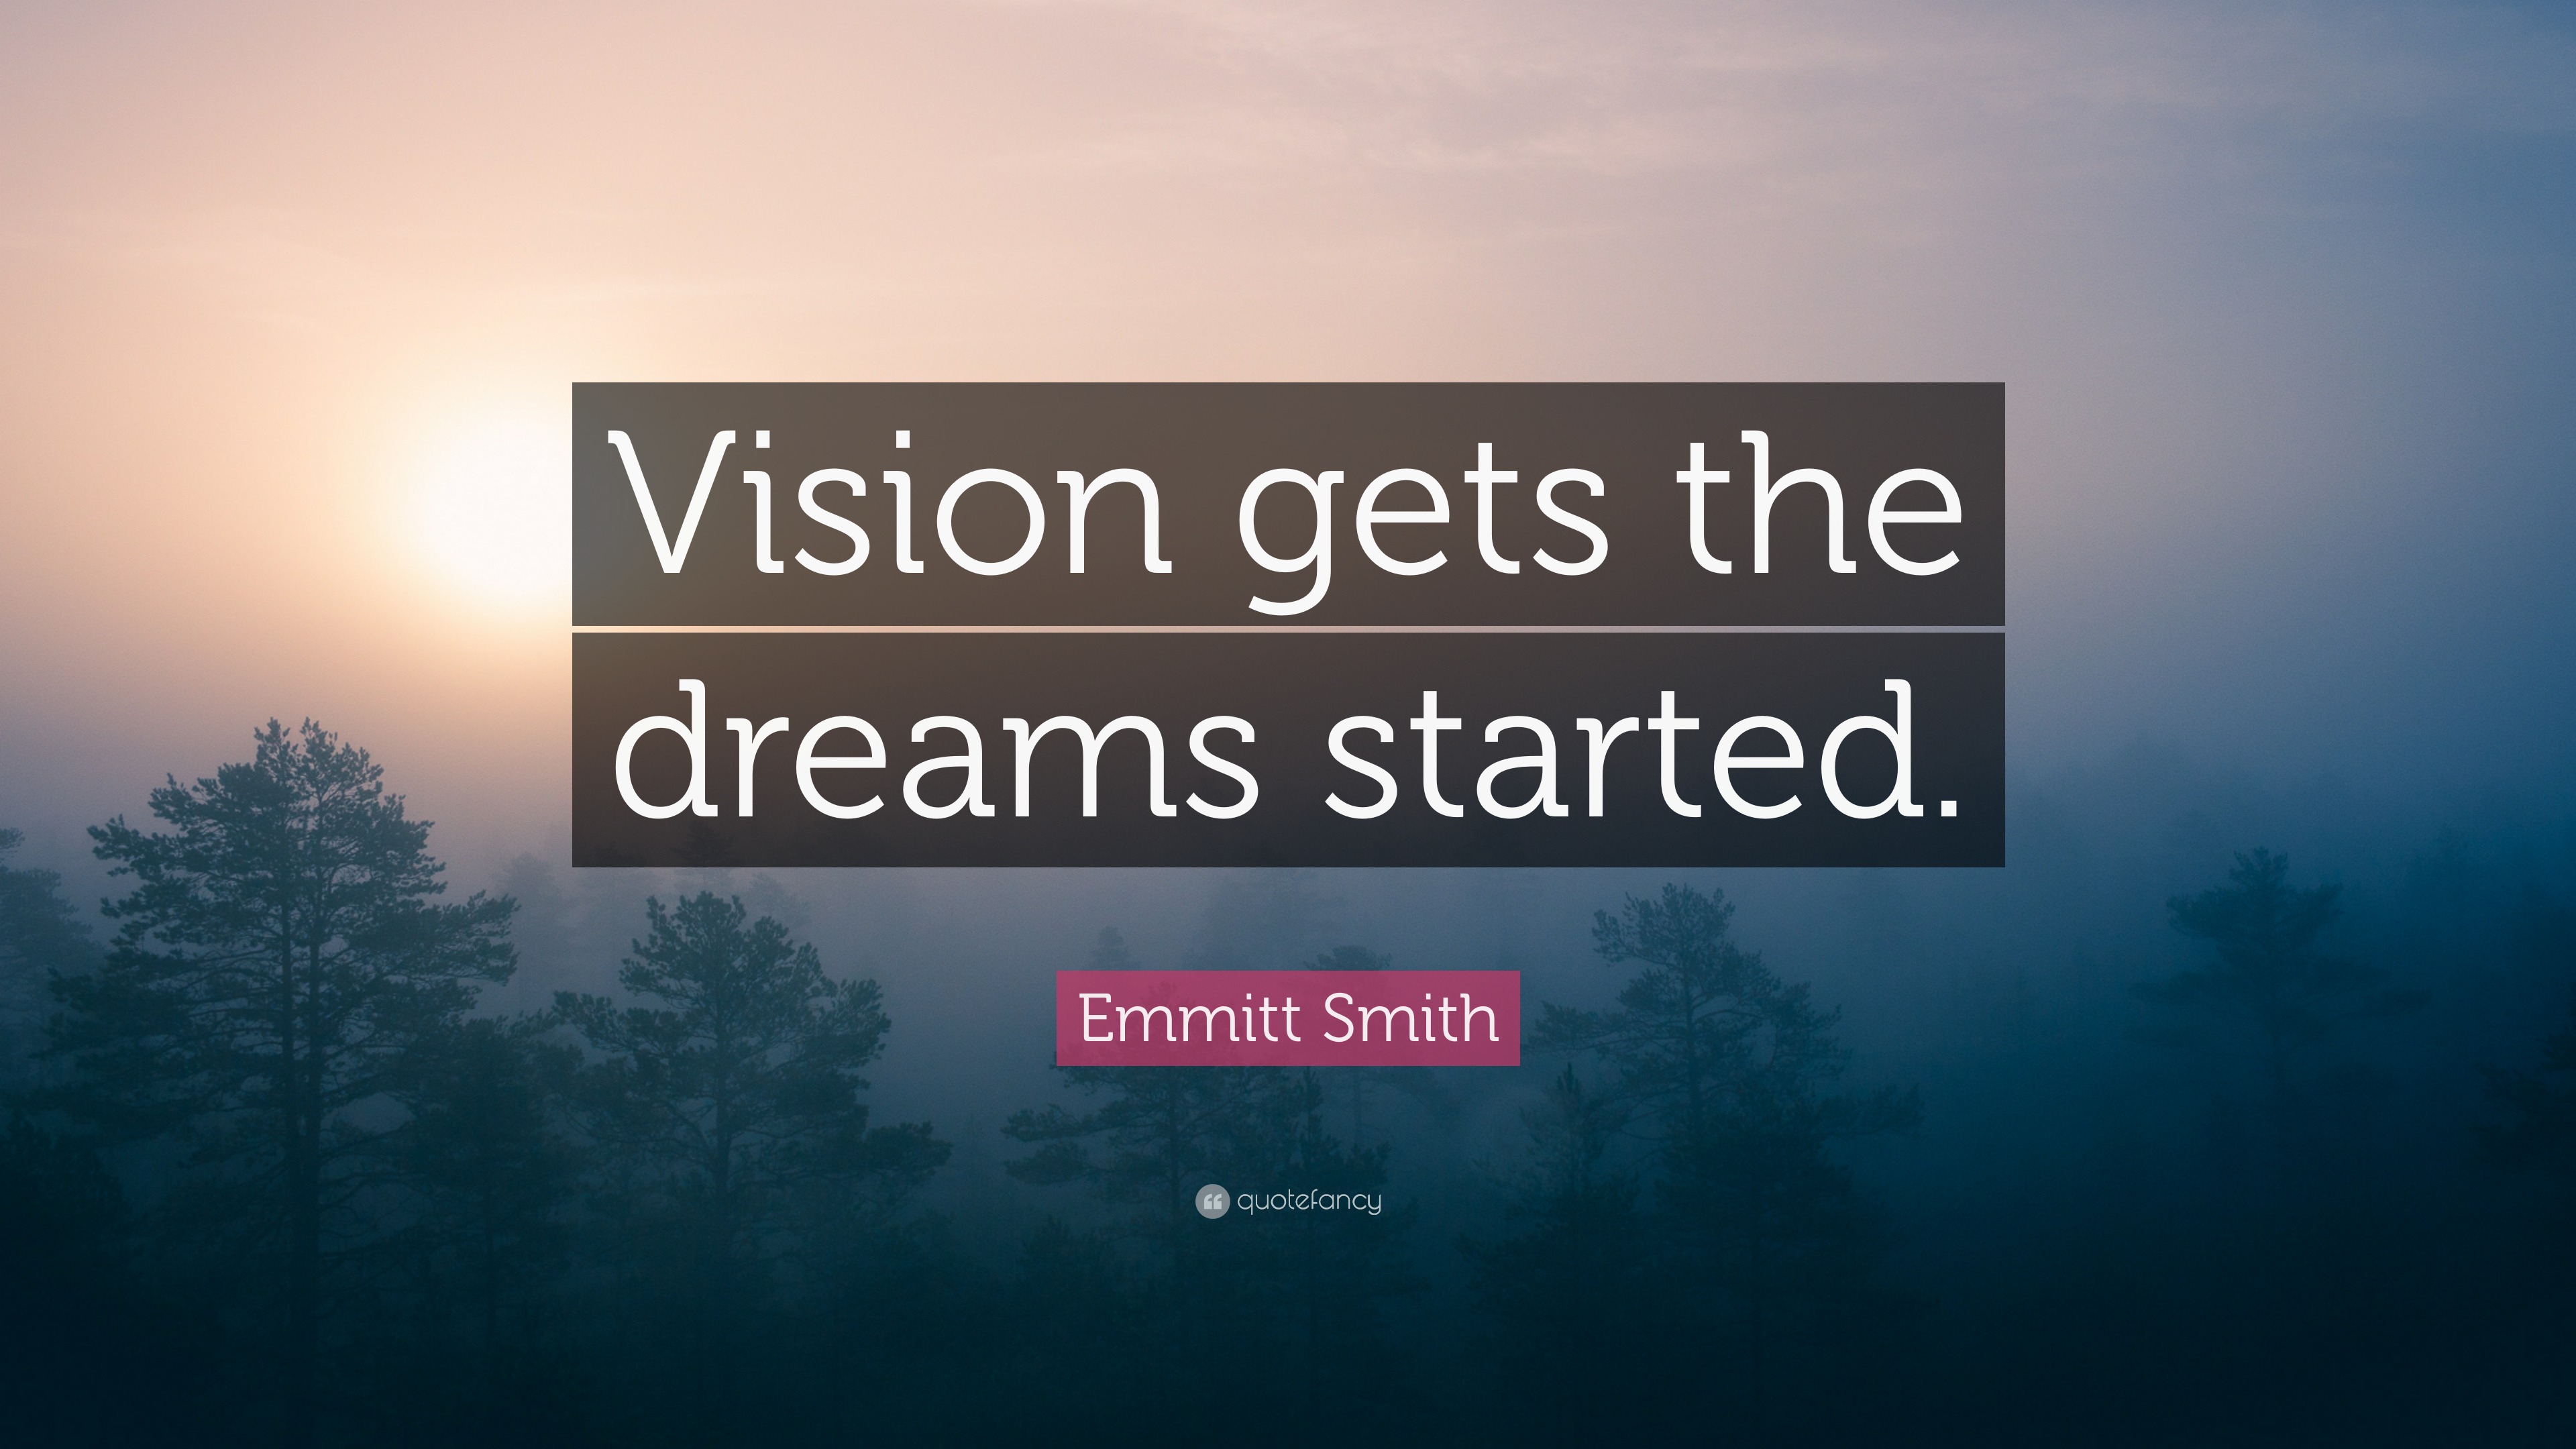 Emmitt Smith Quote “Vision gets the dreams started.”